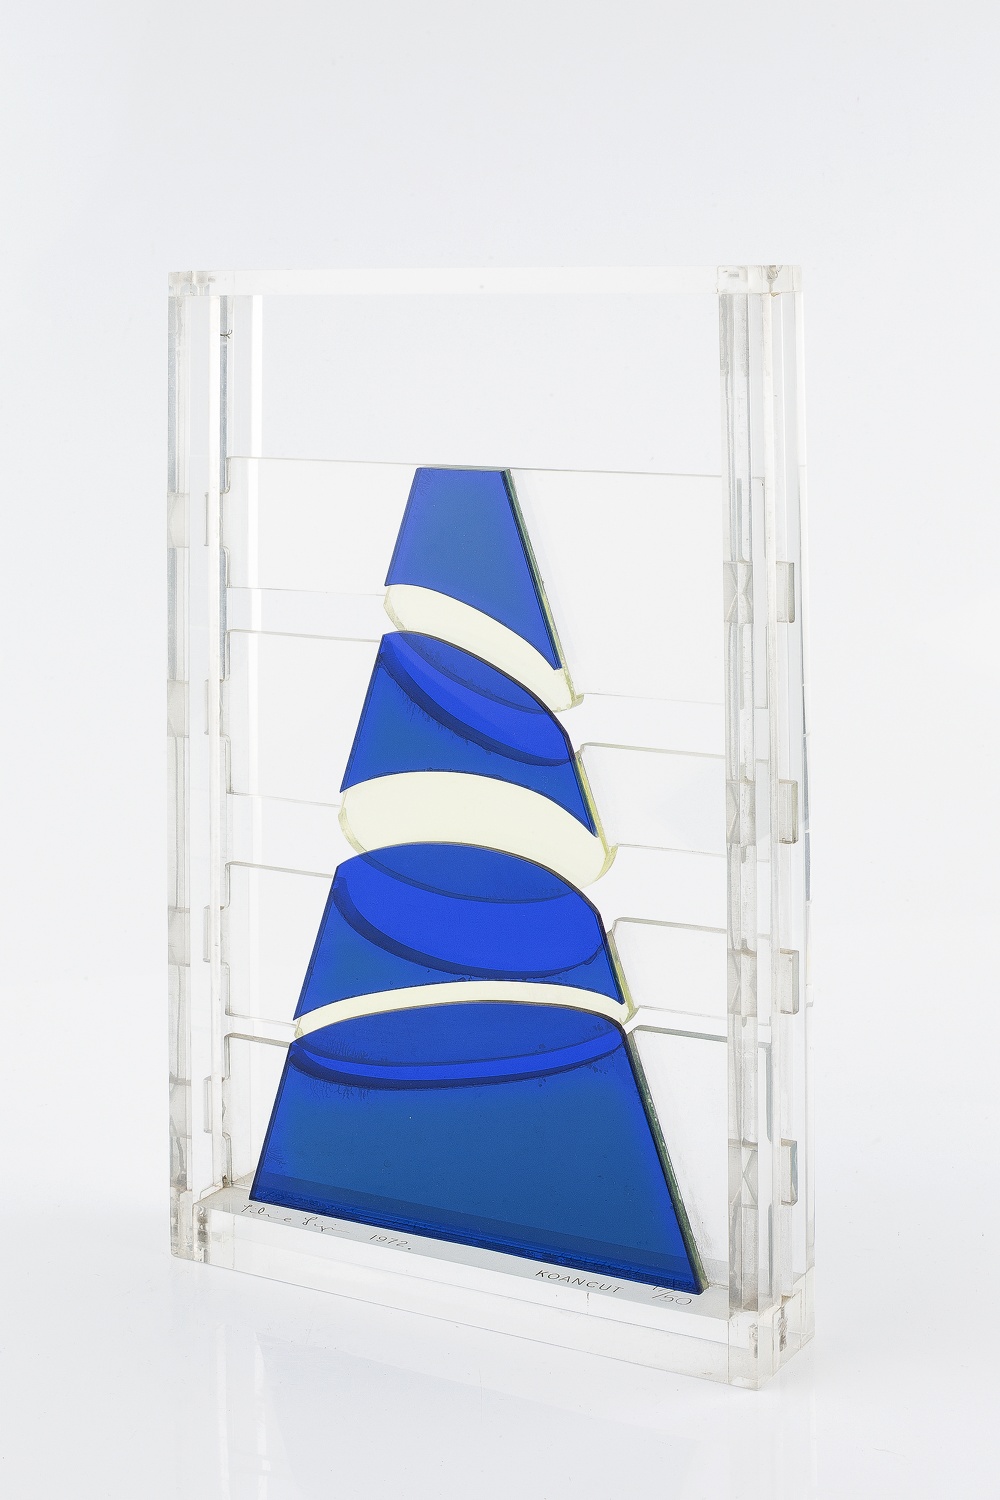 Liliane Lijn (b.1939) Koancut, 1972 17/50, signed, numbered, dated, and titled perspex - Image 5 of 5